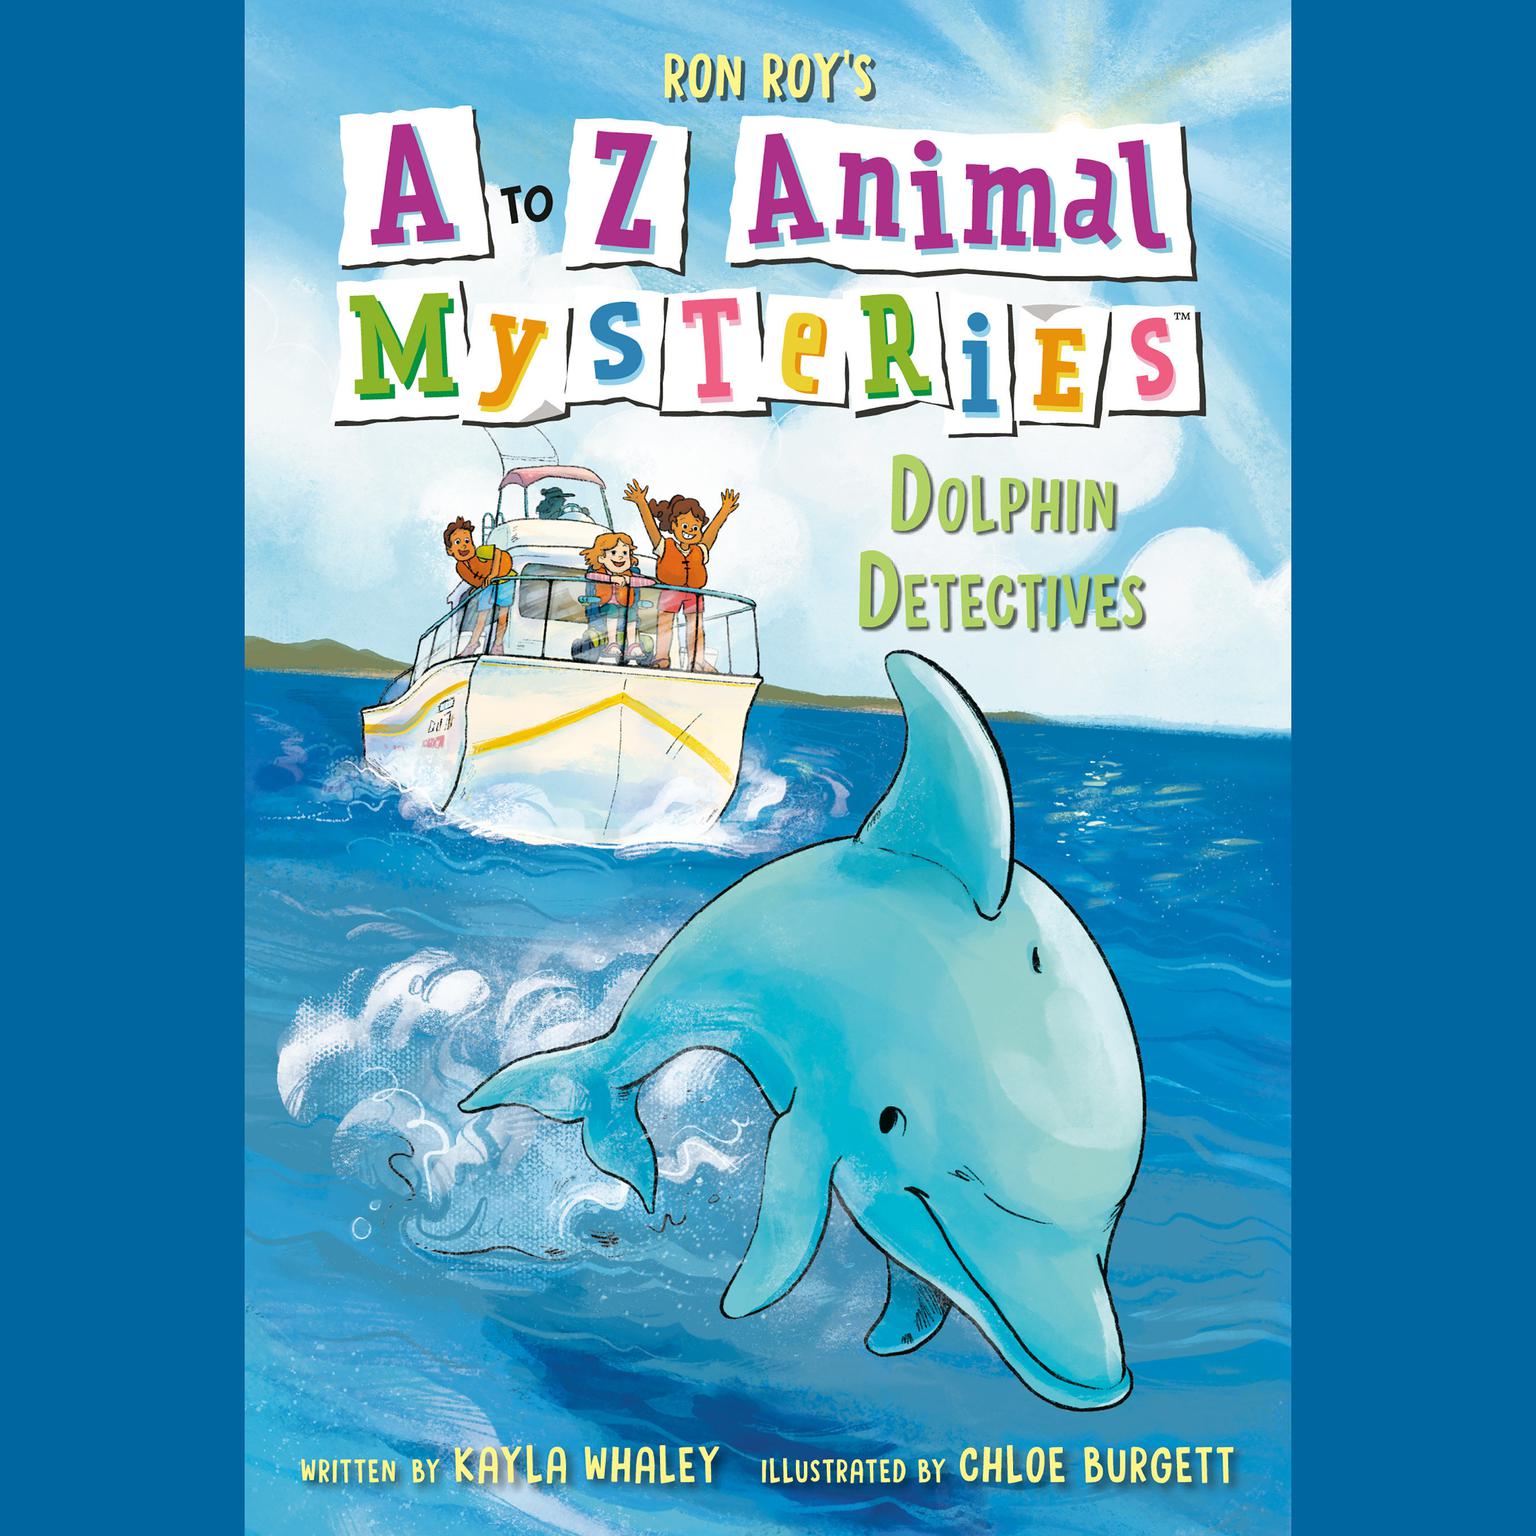 A to Z Animal Mysteries #4: Dolphin Detectives Audiobook, by Ron Roy